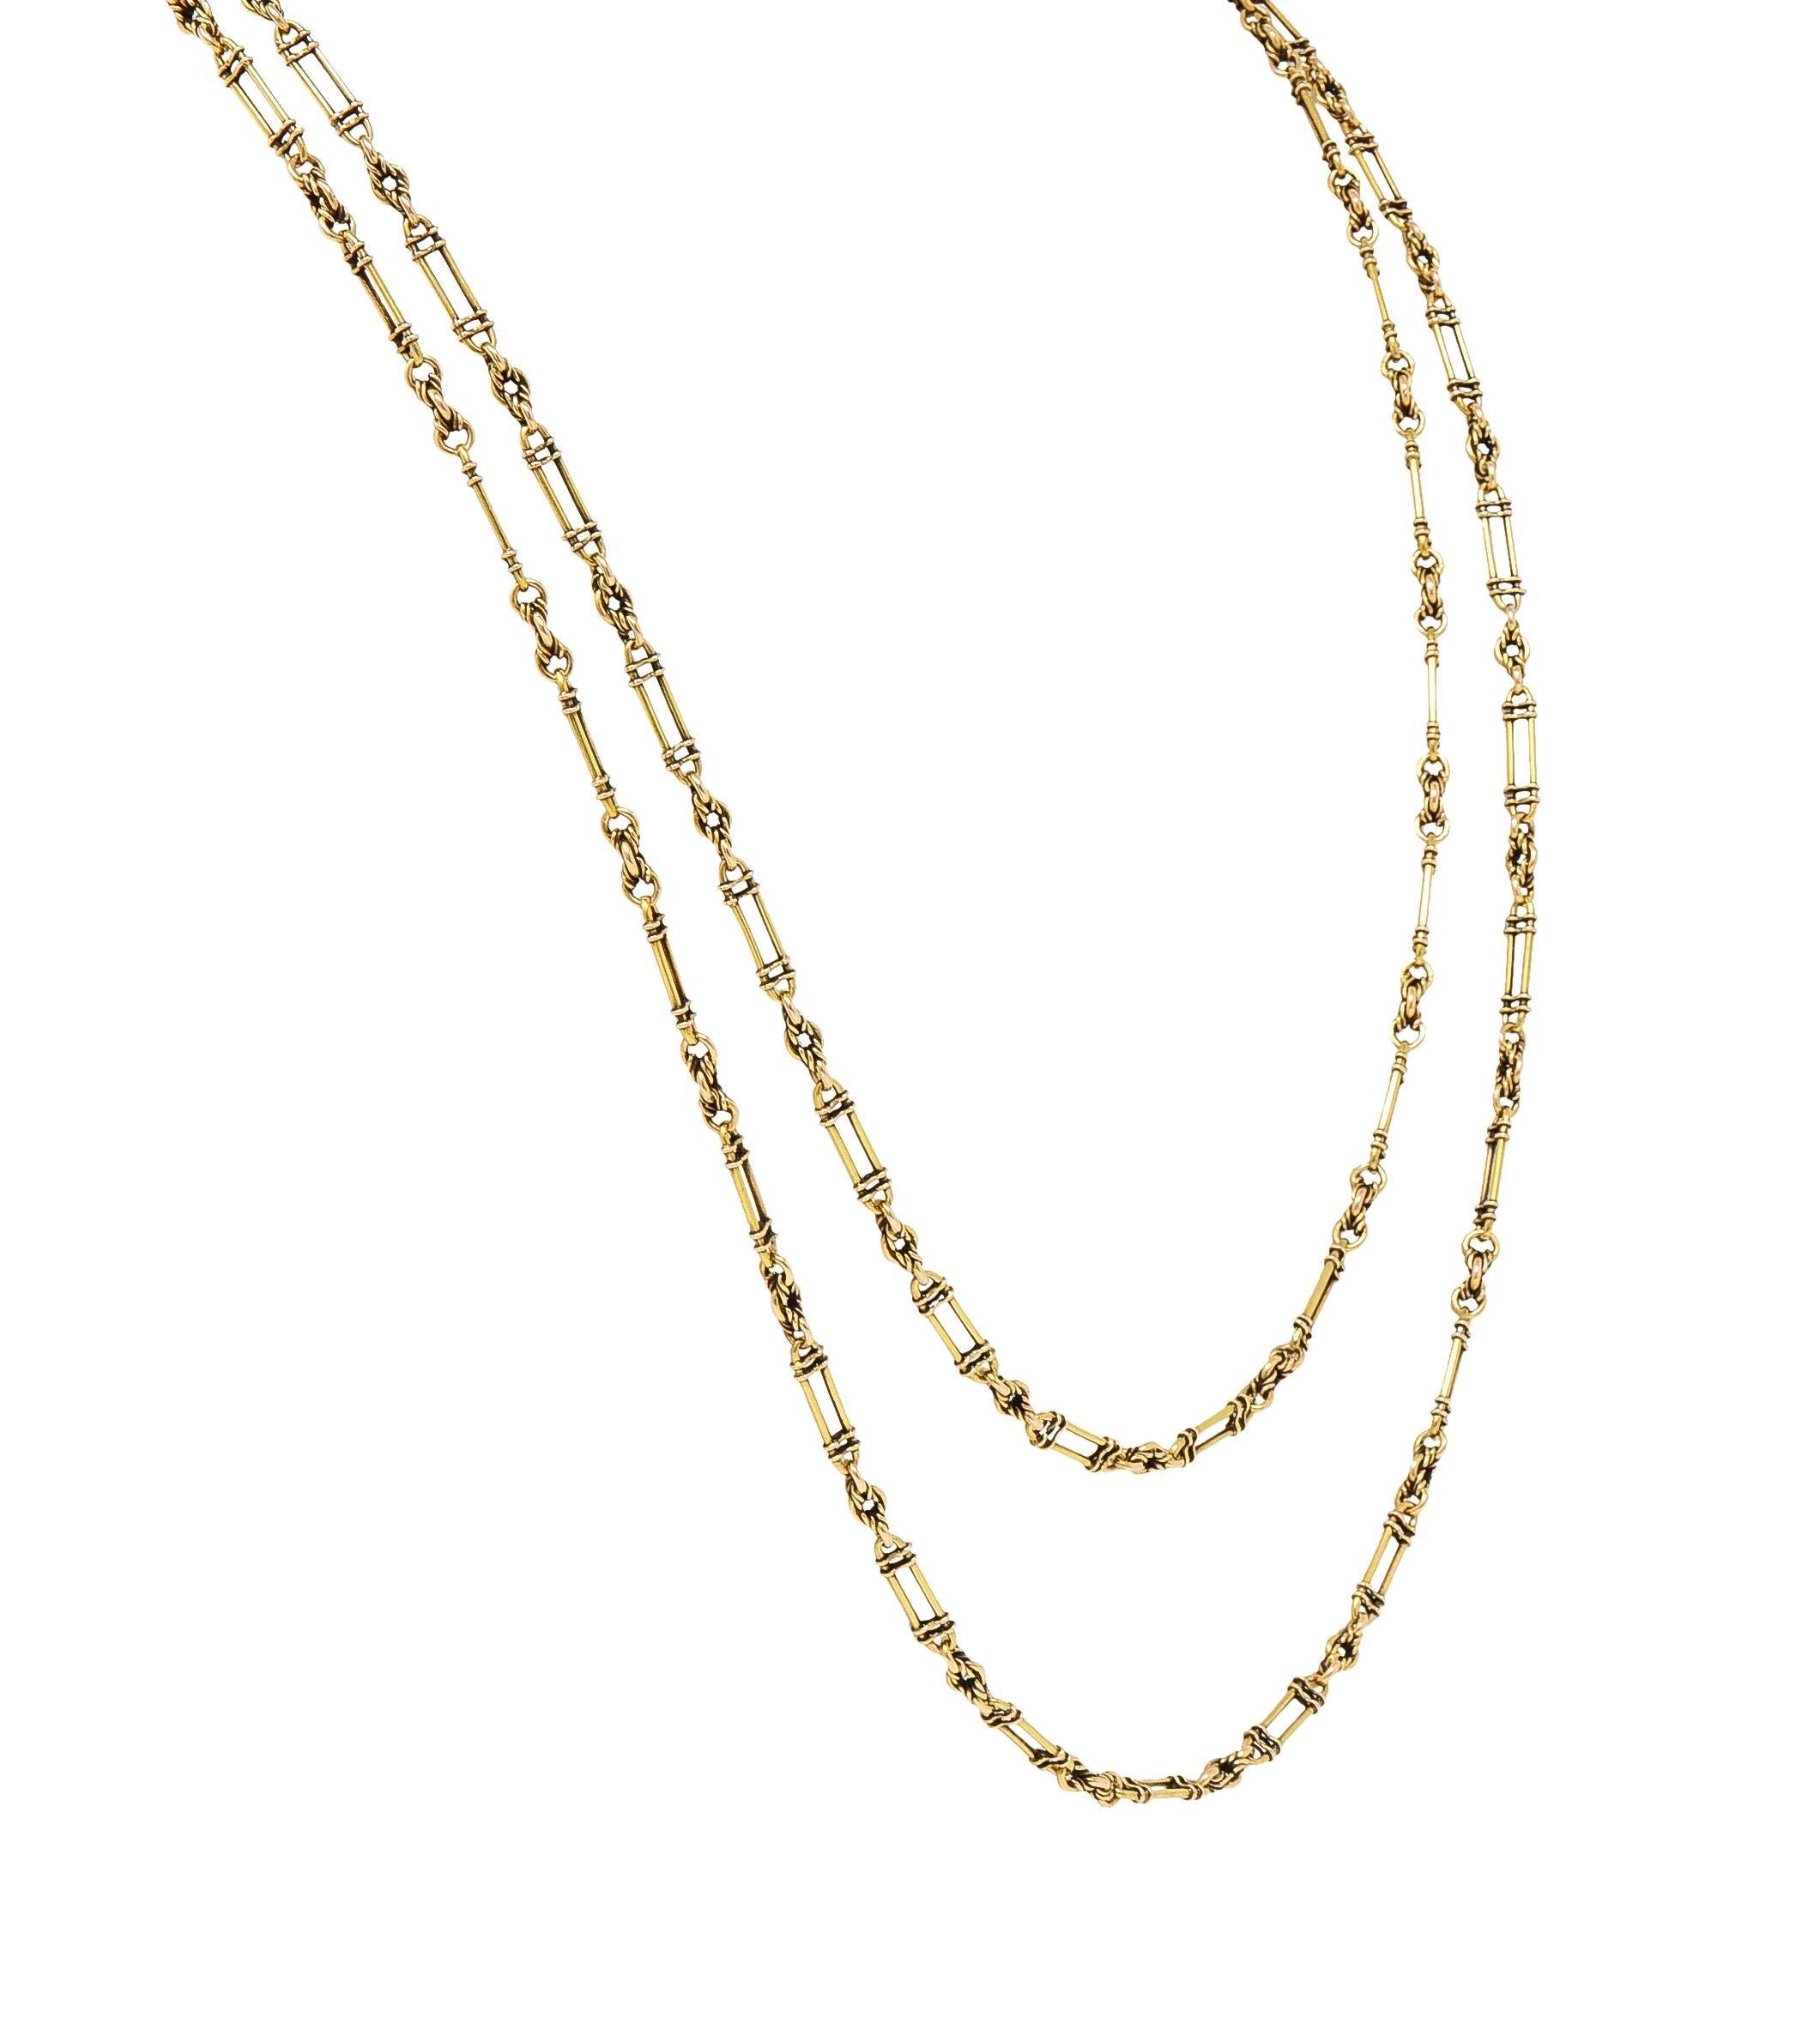 Victorian 15 Karat Yellow Gold Elongated Oval Link Antique Chain Necklace For Sale 1